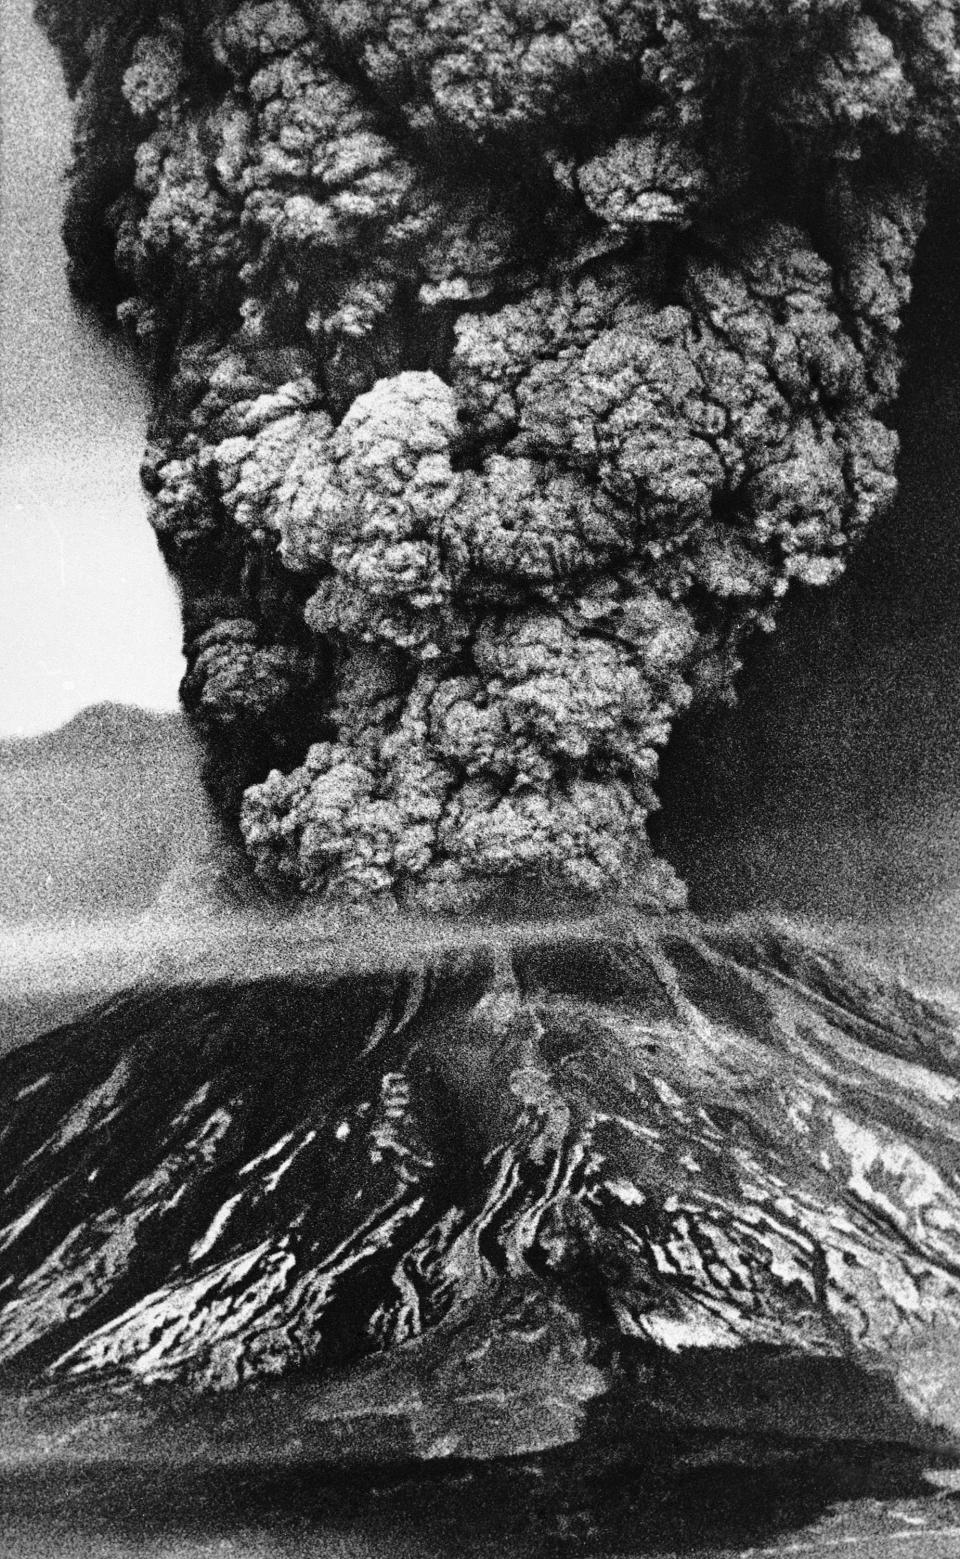 Mount St. Helens sends a plume of ash, smoke and debris skyward in its most violent eruption to date, May 18, 1980. The volcano, located 45 miles northeast of Portland, Wash., became active on March 27. Flooding in some areas has been triggered by the volcano and residents have been evacuated. 